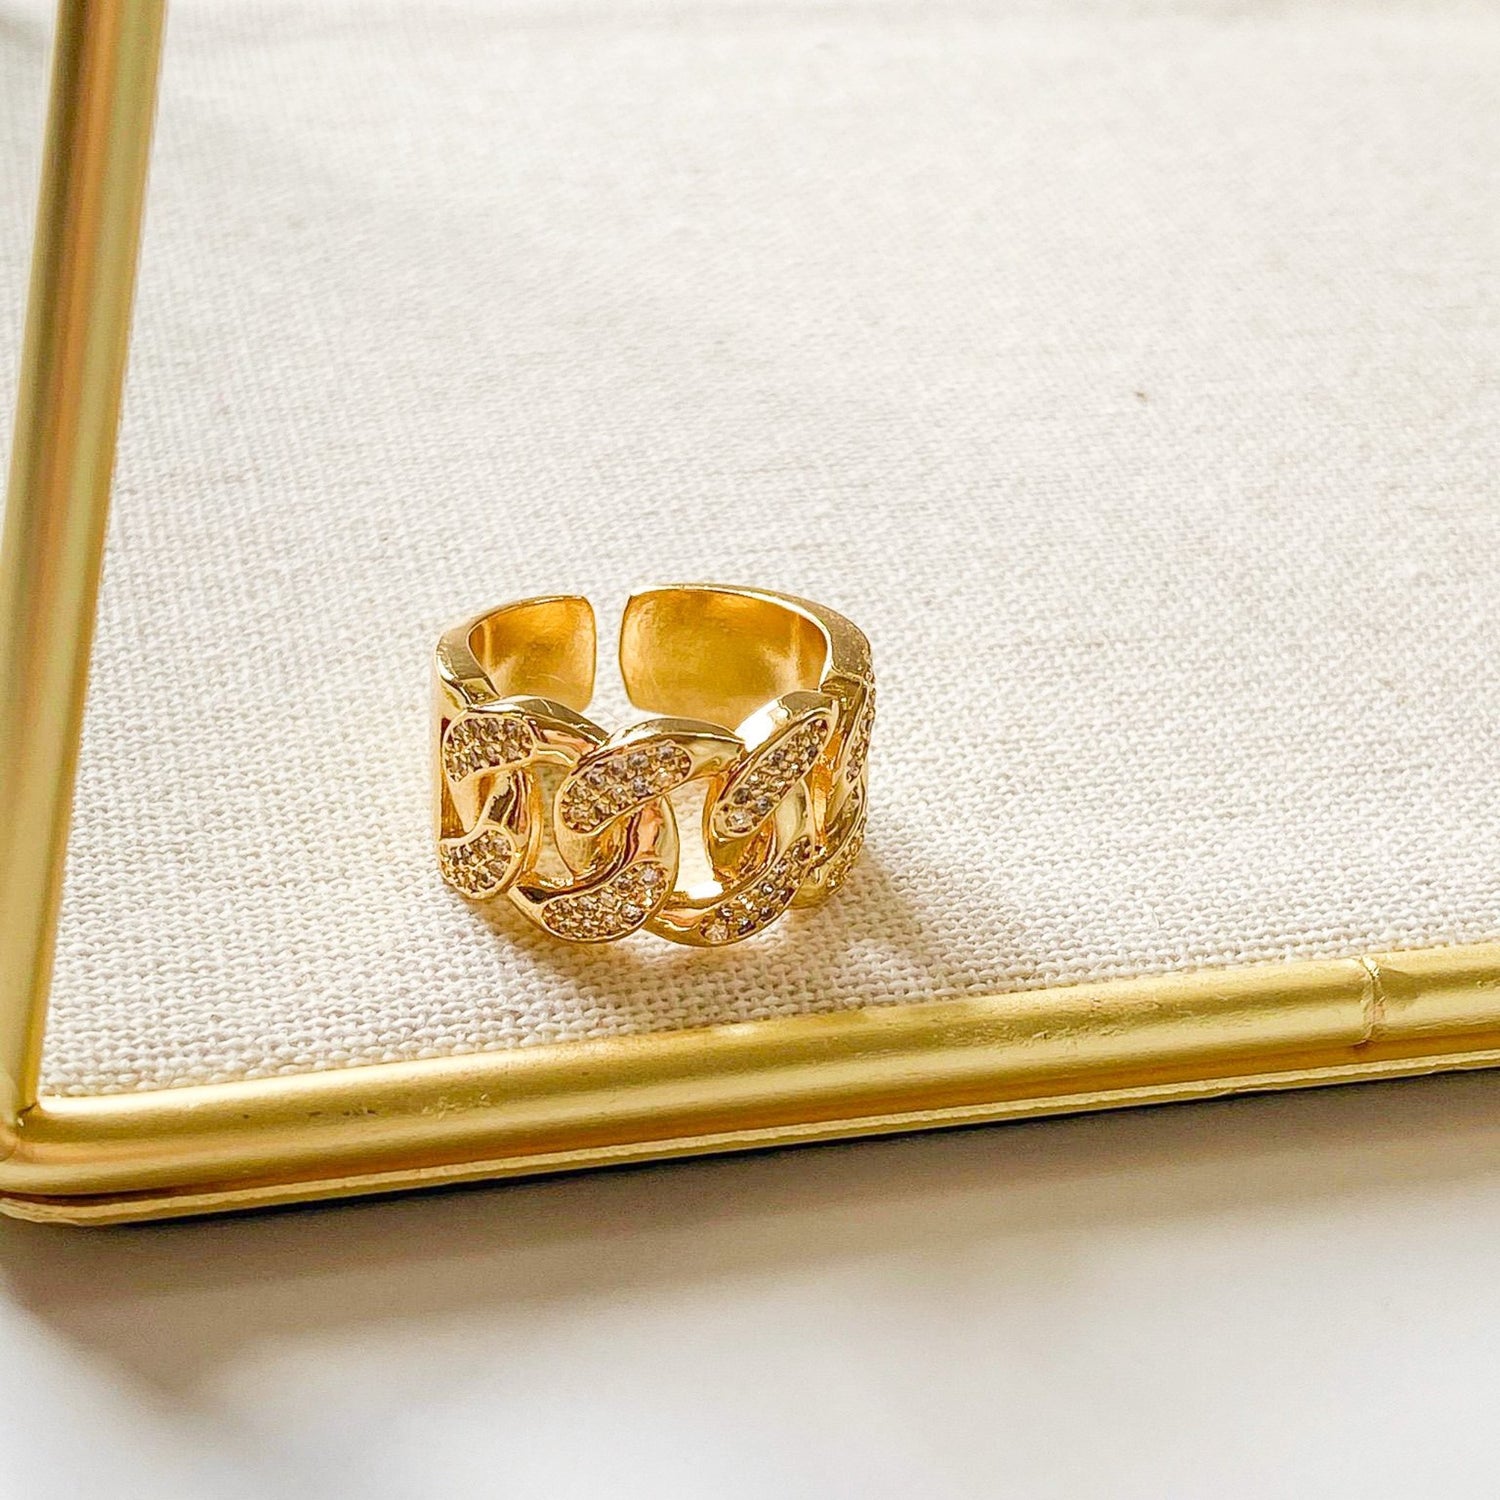 Lucy Gold-filled ring, sold by ISVI Boutique Miami